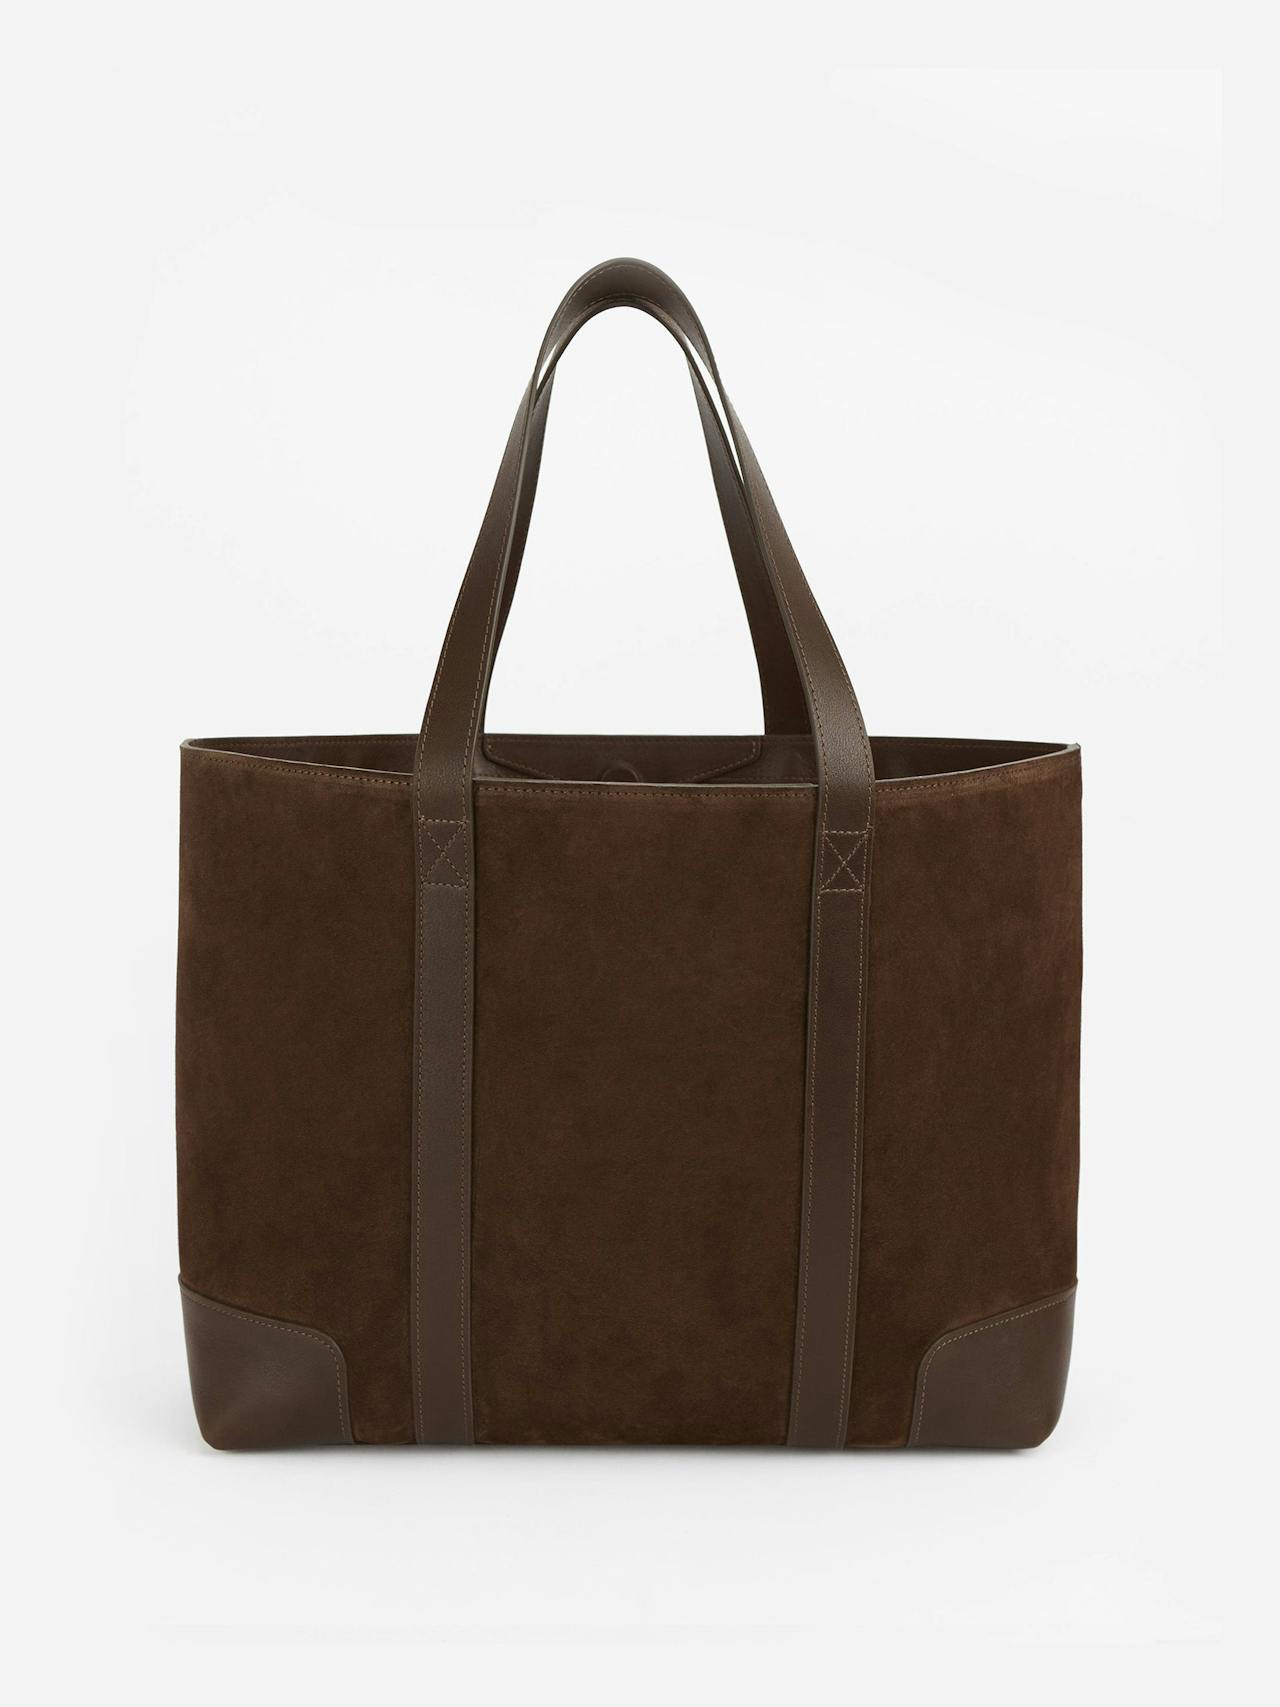 Chocolate suede tote bag